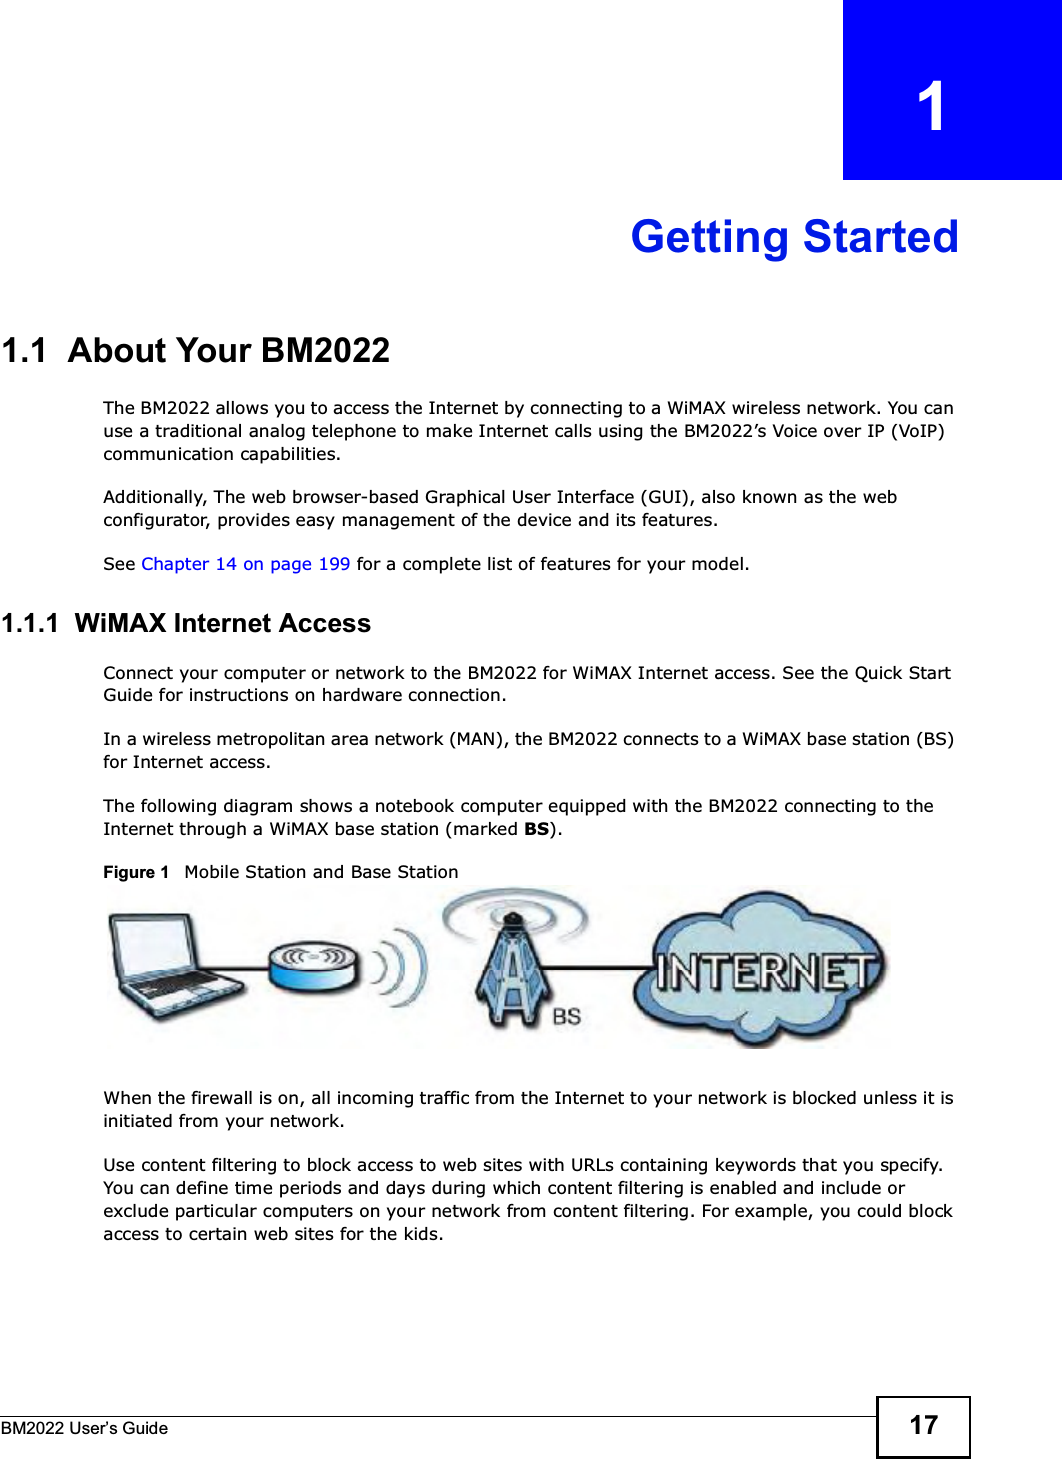 BM2022 Users Guide 17CHAPTER   1Getting Started1.1  About Your BM2022 The BM2022 allows you to access the Internet by connecting to a WiMAX wireless network. You can use a traditional analog telephone to make Internet calls using the BM2022s Voice over IP (VoIP) communication capabilities. Additionally, The web browser-based Graphical User Interface (GUI), also known as the web configurator, provides easy management of the device and its features.See Chapter 14 on page 199 for a complete list of features for your model.1.1.1  WiMAX Internet AccessConnect your computer or network to the BM2022 for WiMAX Internet access. See the Quick Start Guide for instructions on hardware connection.In a wireless metropolitan area network (MAN), the BM2022 connects to a WiMAX base station (BS) for Internet access. The following diagram shows a notebook computer equipped with the BM2022 connecting to the Internet through a WiMAX base station (marked BS).Figure 1   Mobile Station and Base StationWhen the firewall is on, all incoming traffic from the Internet to your network is blocked unless it is initiated from your network. Use content filtering to block access to web sites with URLs containing keywords that you specify. You can define time periods and days during which content filtering is enabled and include or exclude particular computers on your network from content filtering. For example, you could block access to certain web sites for the kids.